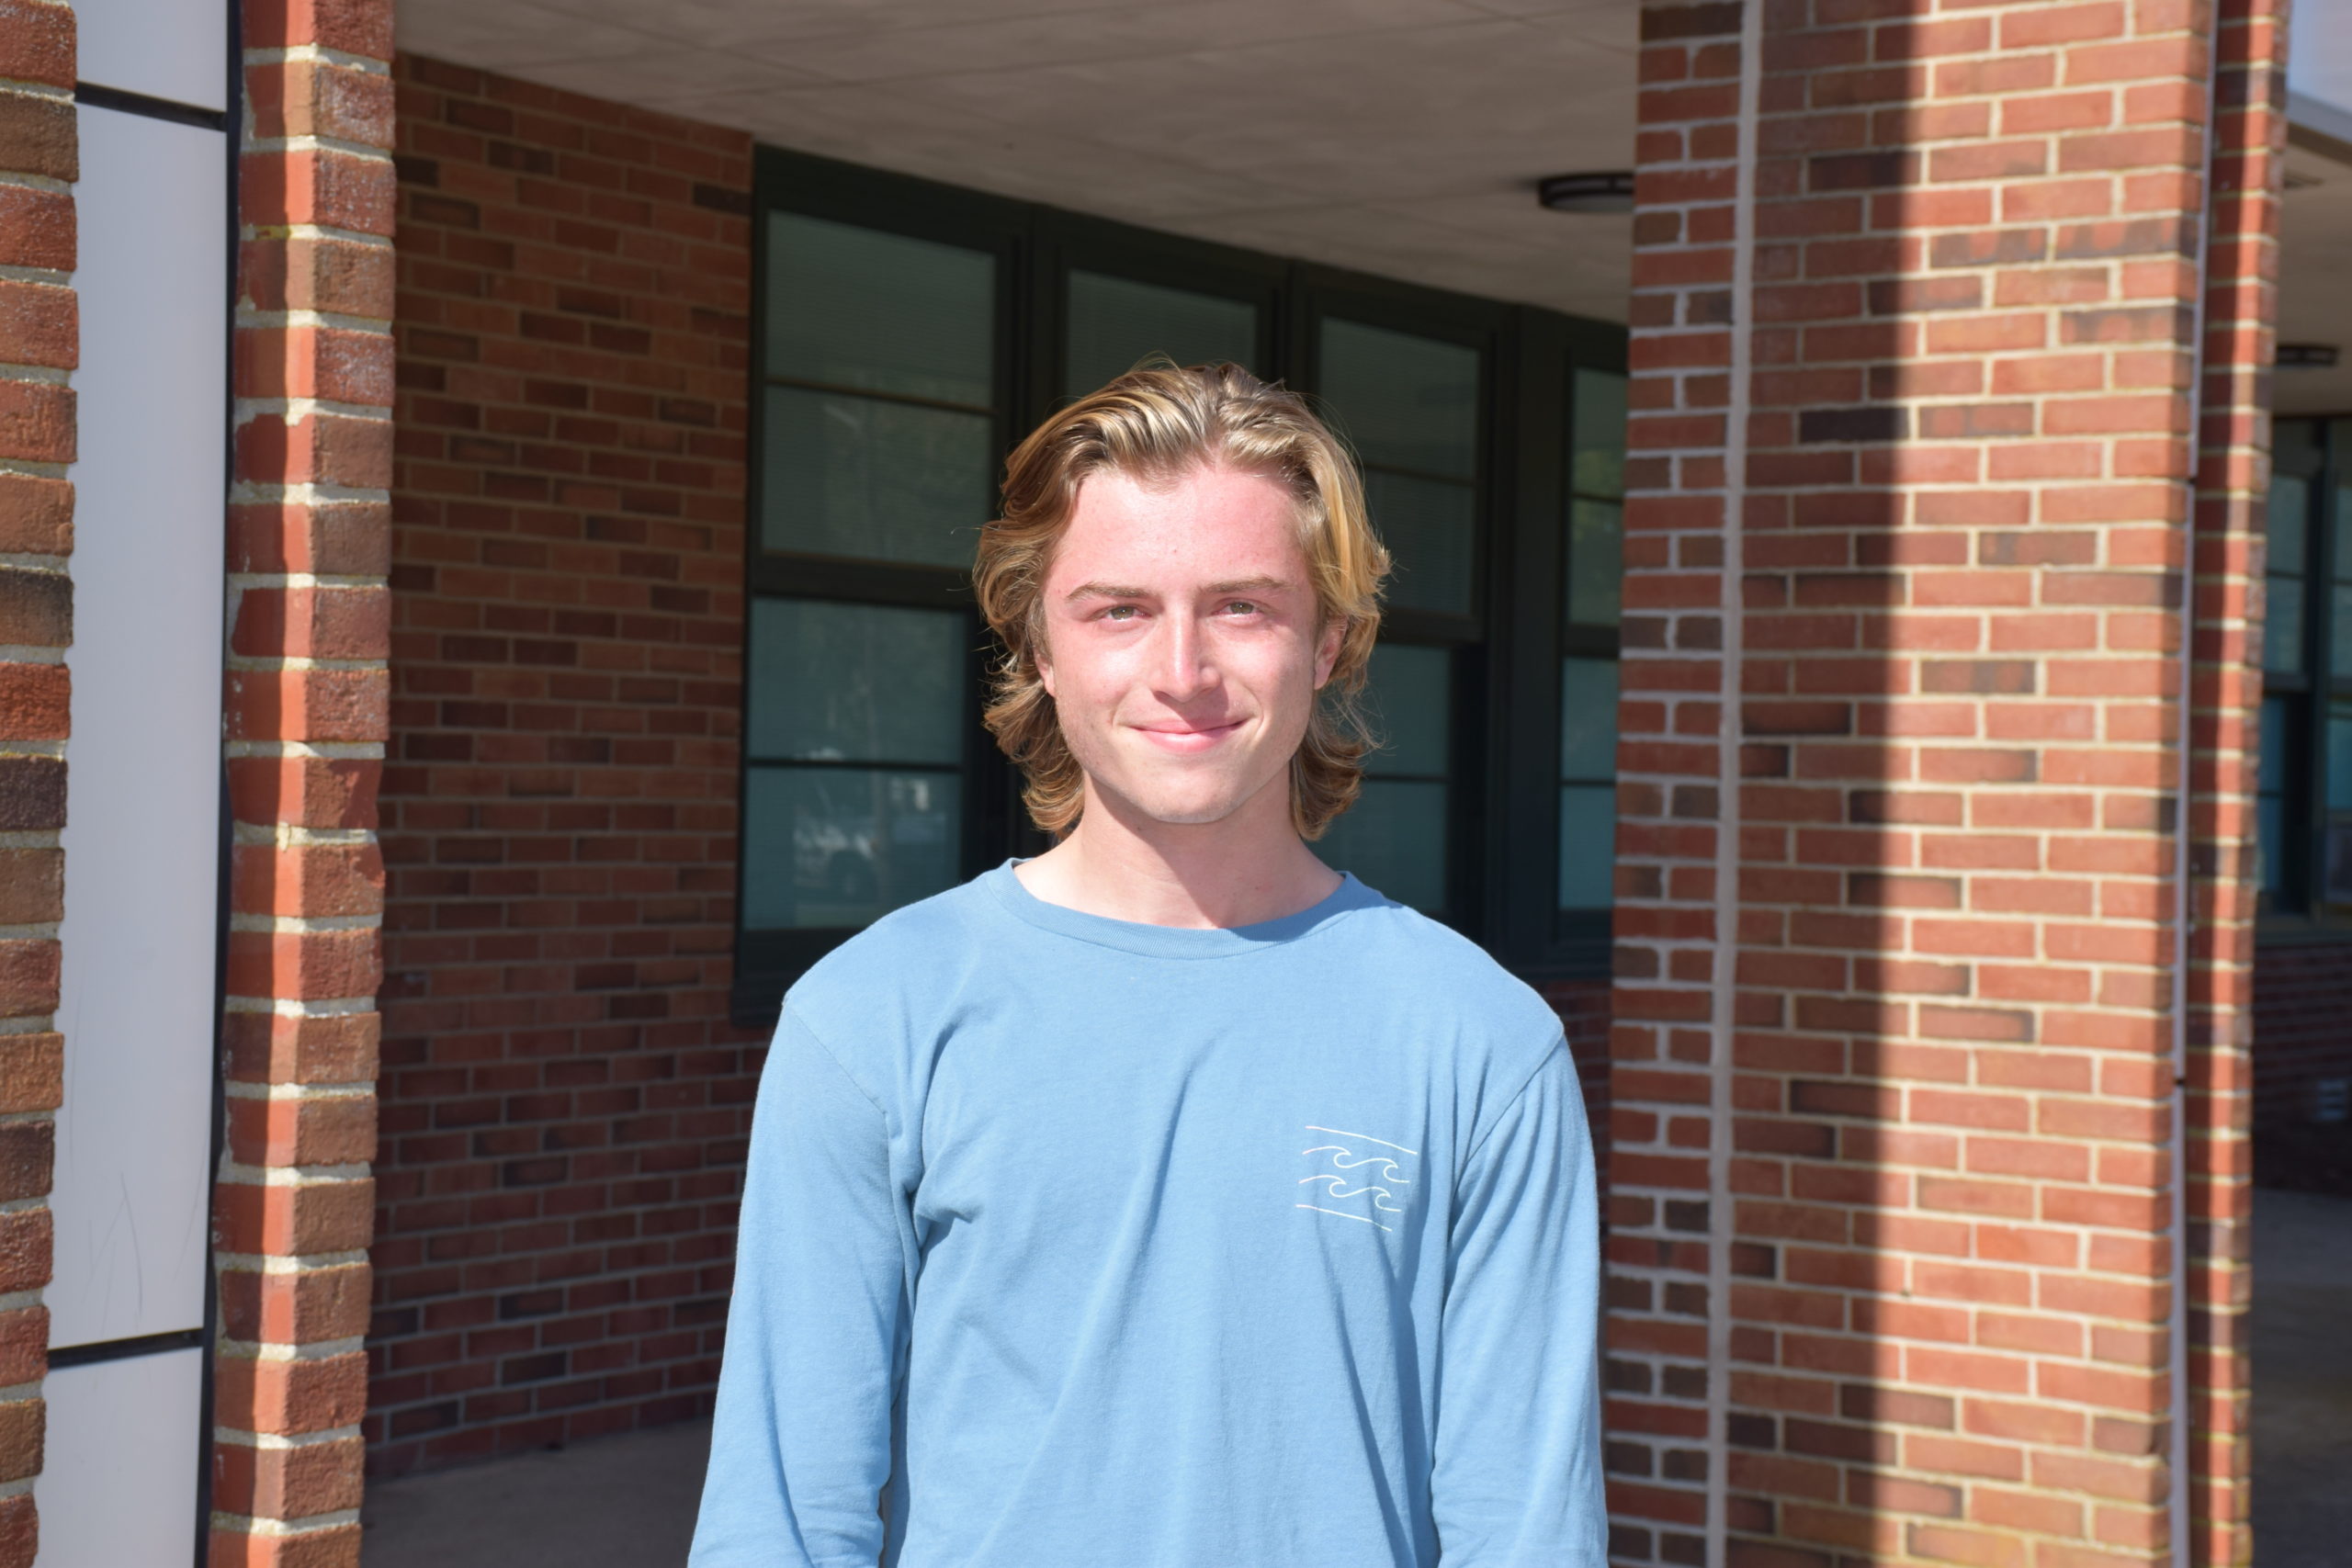 Westhampton Beach High School junior Jack Schultz has been named a finalist in the New York State Science and Engineering Fair.